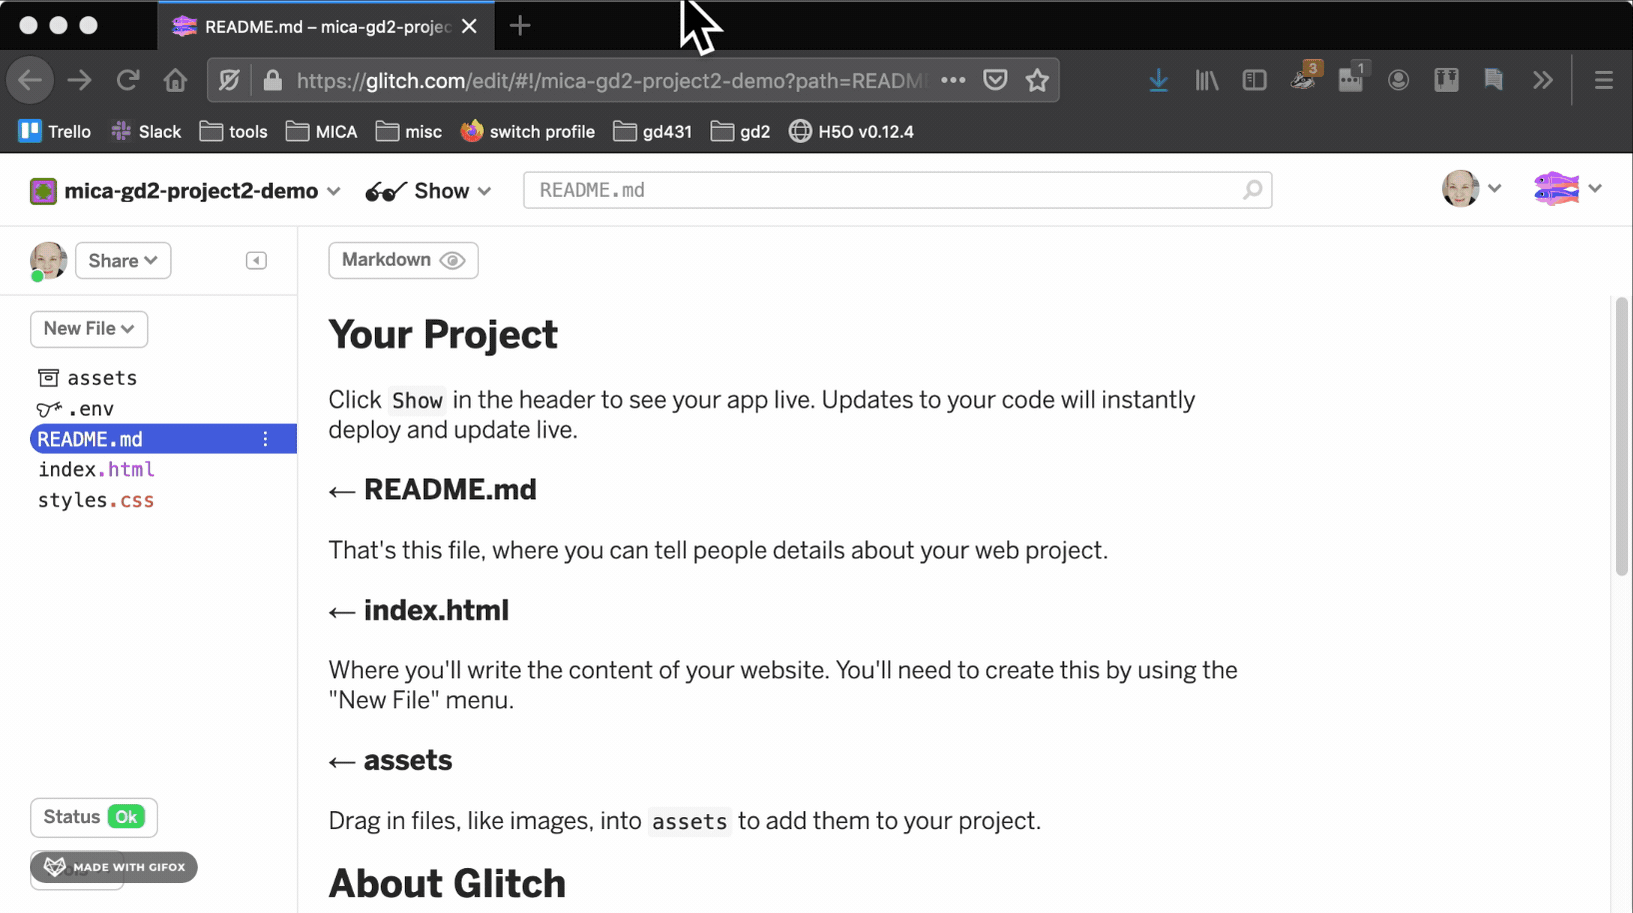 Open the assets folder on Glitch.com in the browser, click the image and use the Copy button.